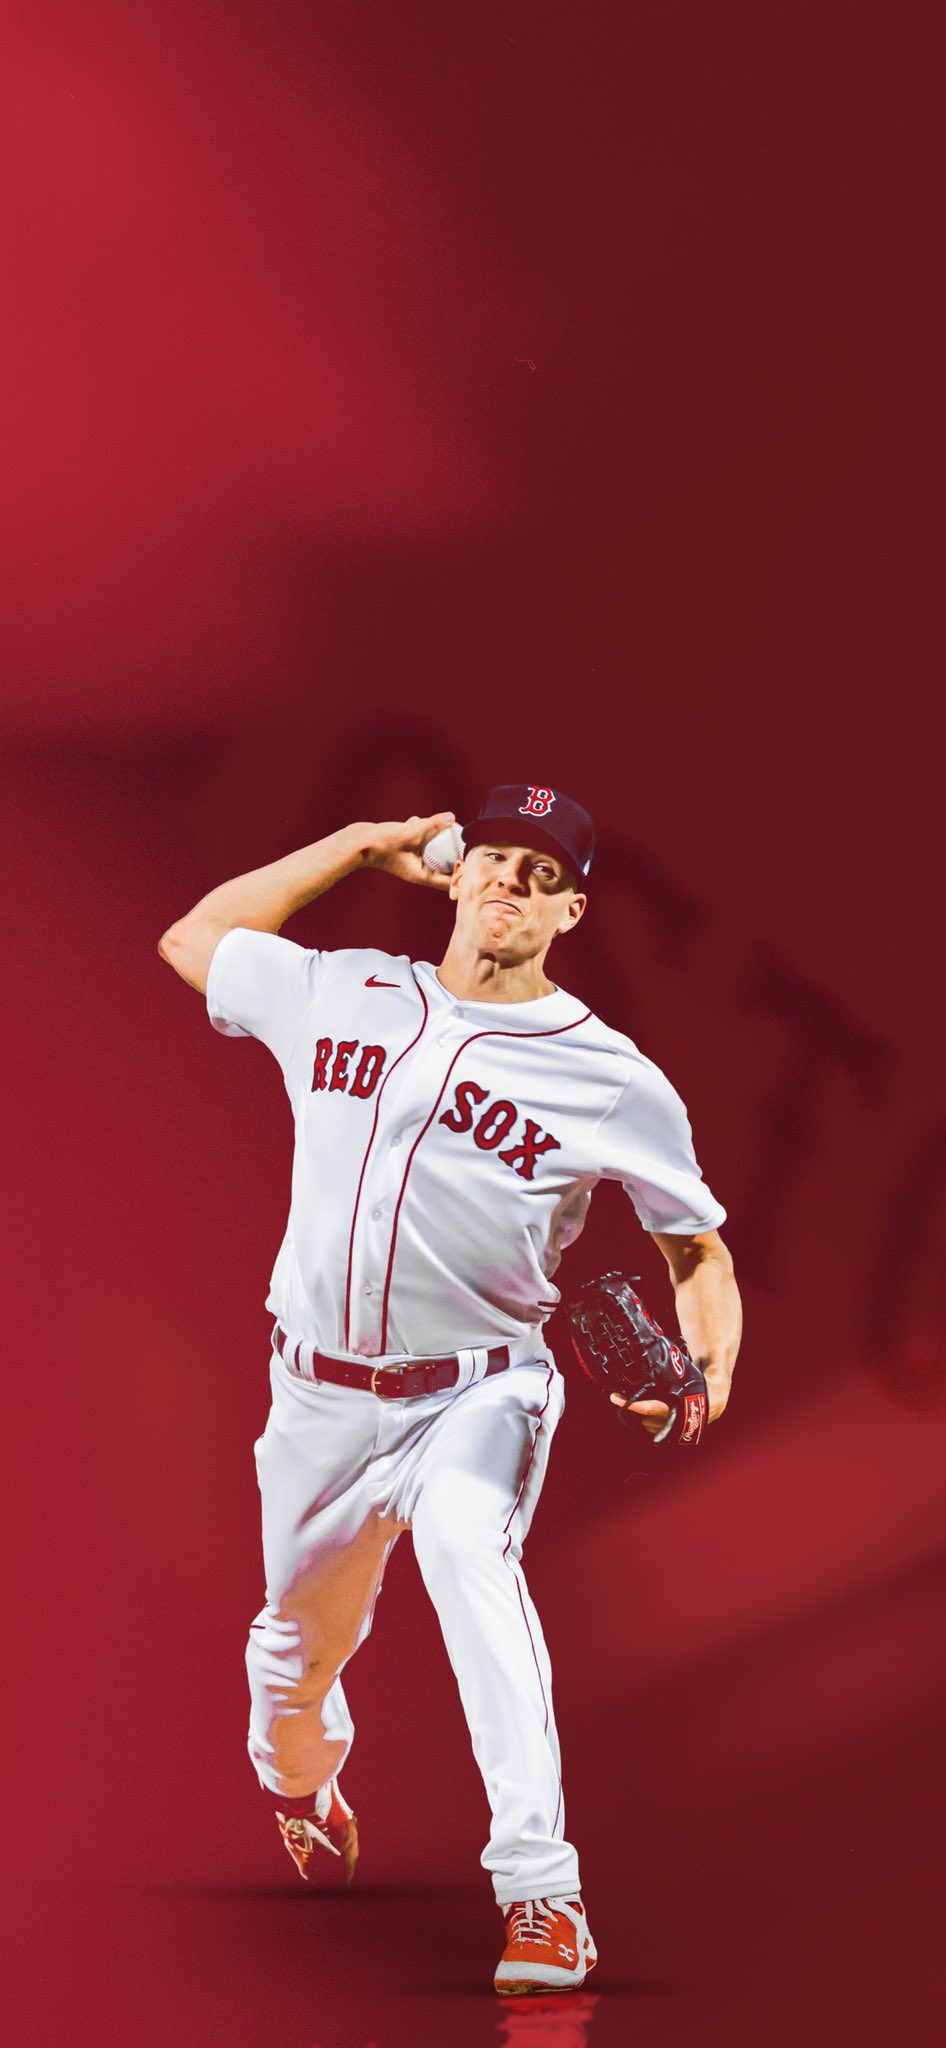 Red Sox on X: You know what day it is. #WallpaperWednesday